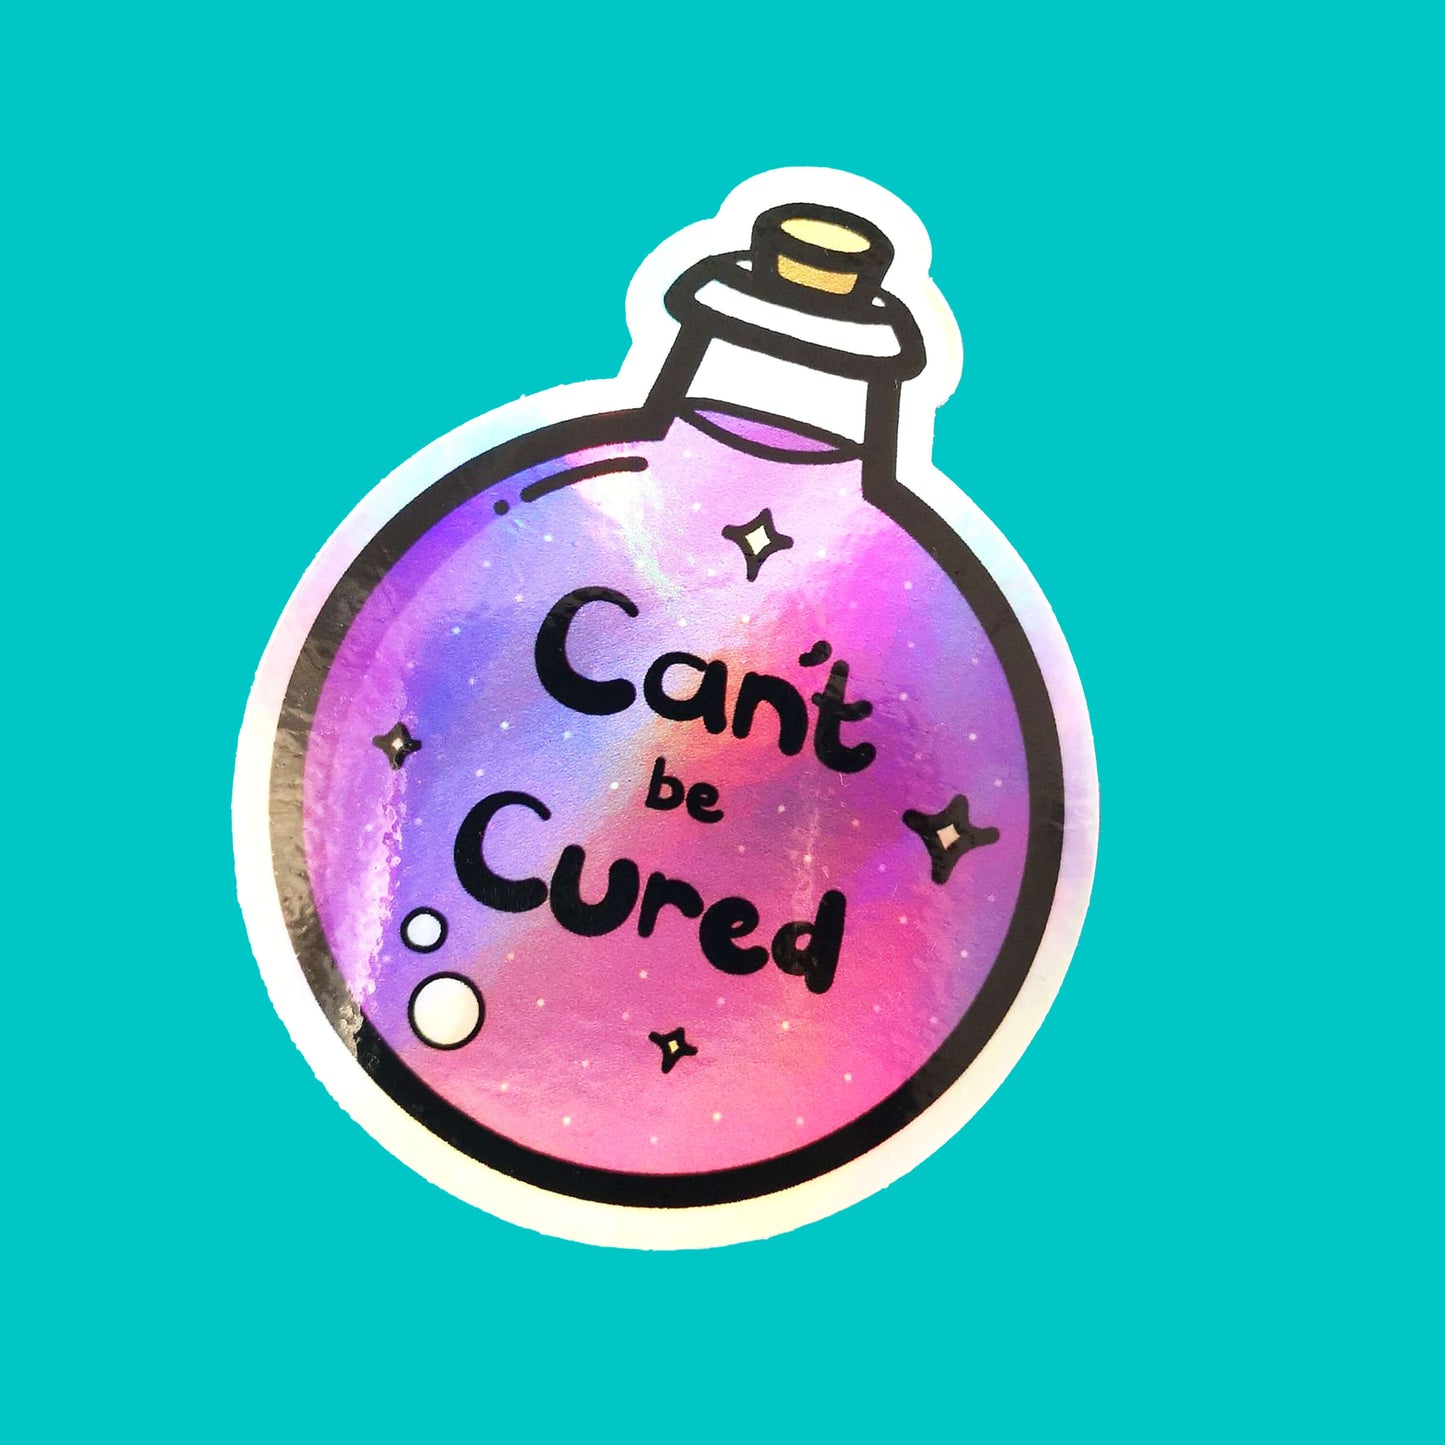 The Can't Be Cured Holographic Sticker on a blue background. The sticker is a circular potion bottle with a cork stop top and purple middle. In the middle is white and yellow sparkles, two pastel pink bubbles and black text that reads 'can't be cured'. The design was inspired by chronic illnesses.